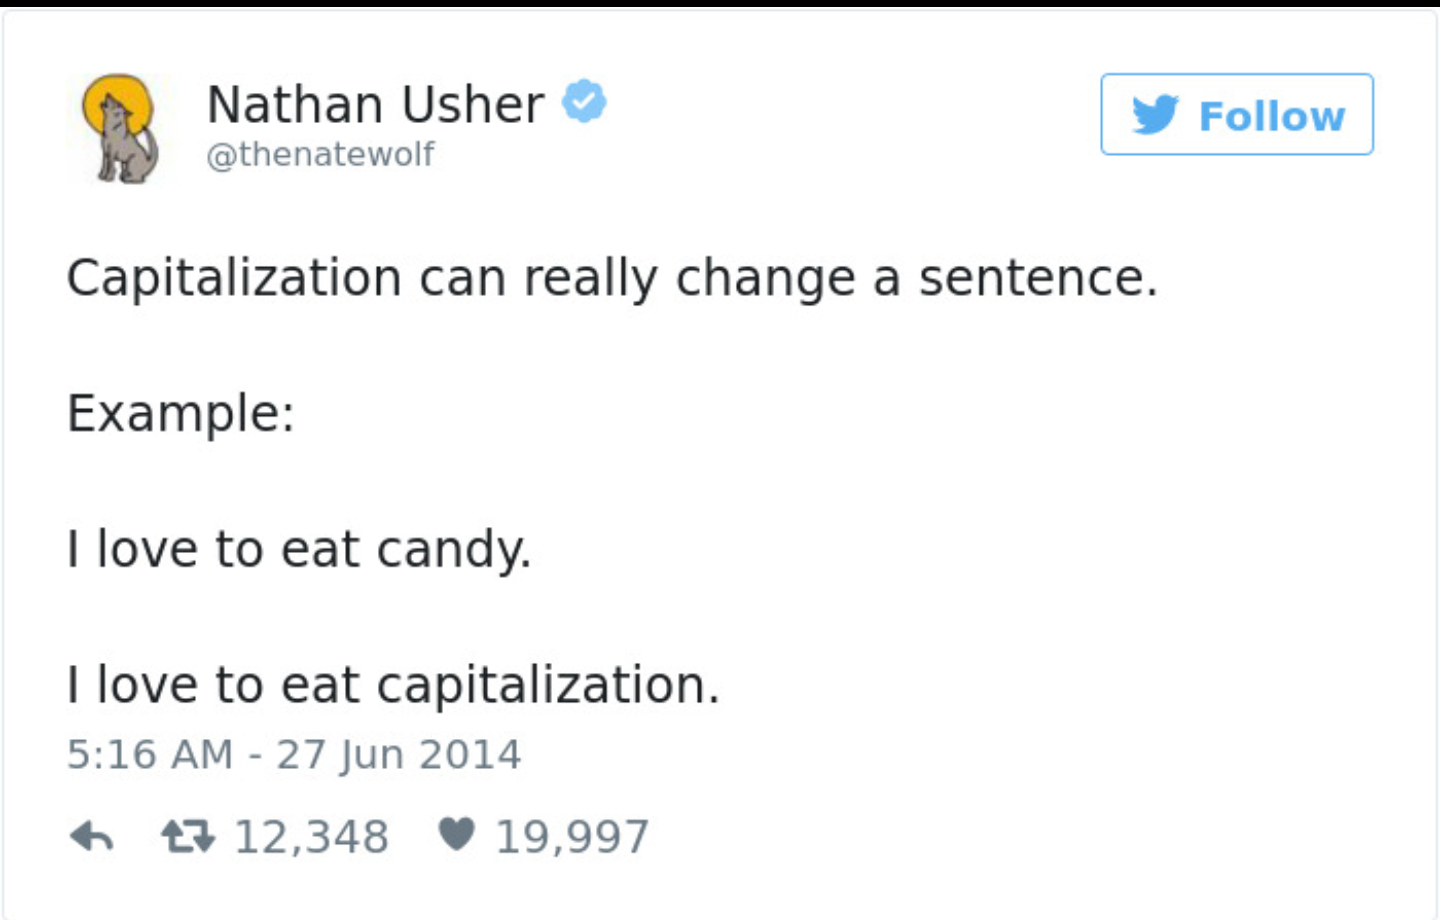 Mean - Nathan Usher Capitalization can really change a sentence. Example I love to eat candy. I love to eat capitalization. 27 12,348 19,997